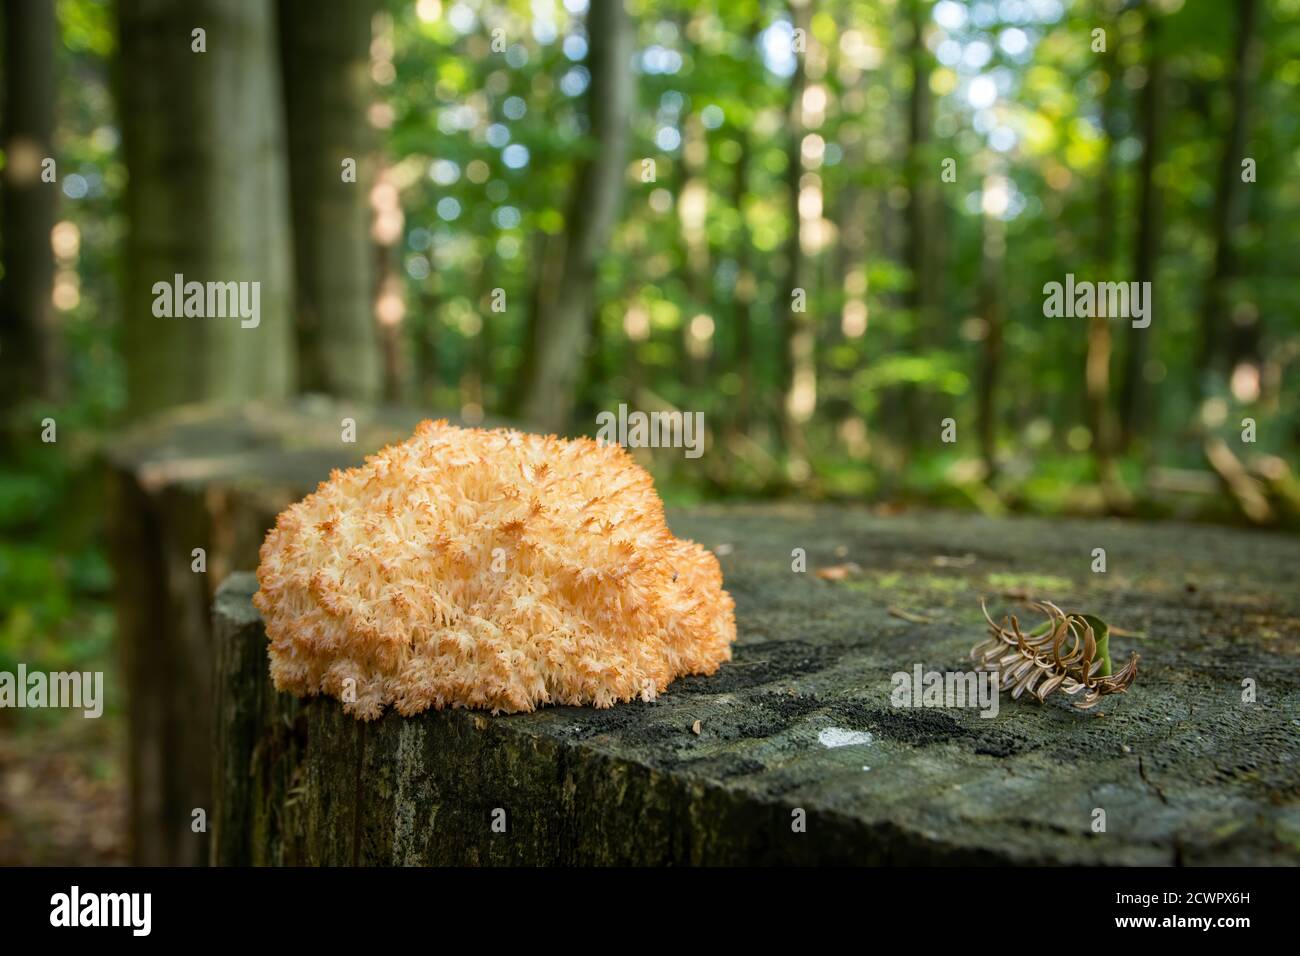 Coral tooth fungus (Hericium coralloides). Bieszczady mountains, Poland, Europe Stock Photo